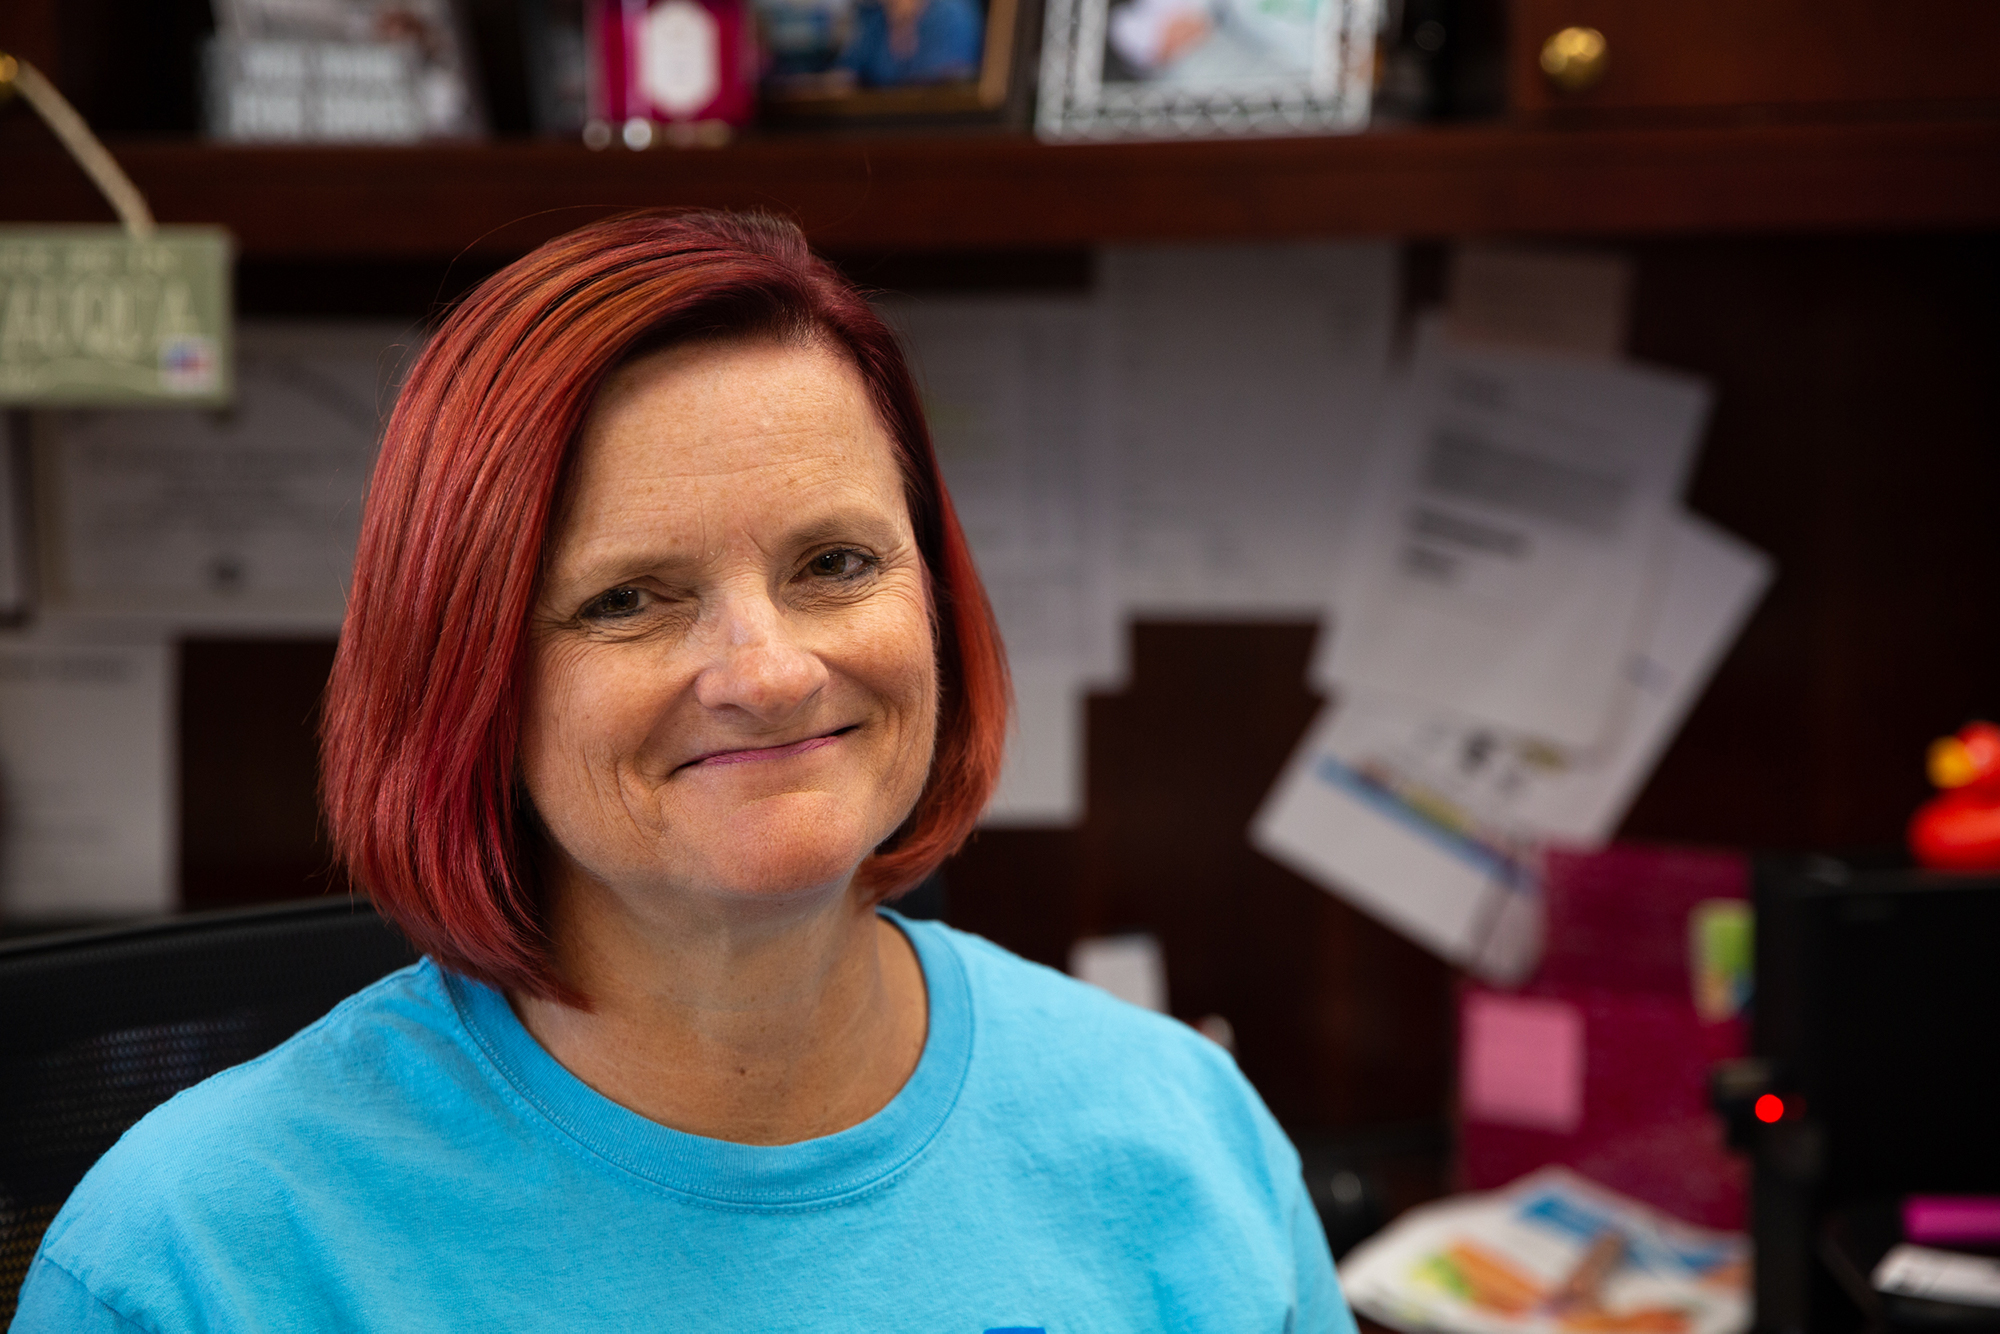 Sharon Michalik, director of communications for Bay District Schools in Panama City, Florida, and her team have worked with local and national organizations to get resources to students, families, teachers and schools affected by natural disasters. (Stacy Fernández/News21)